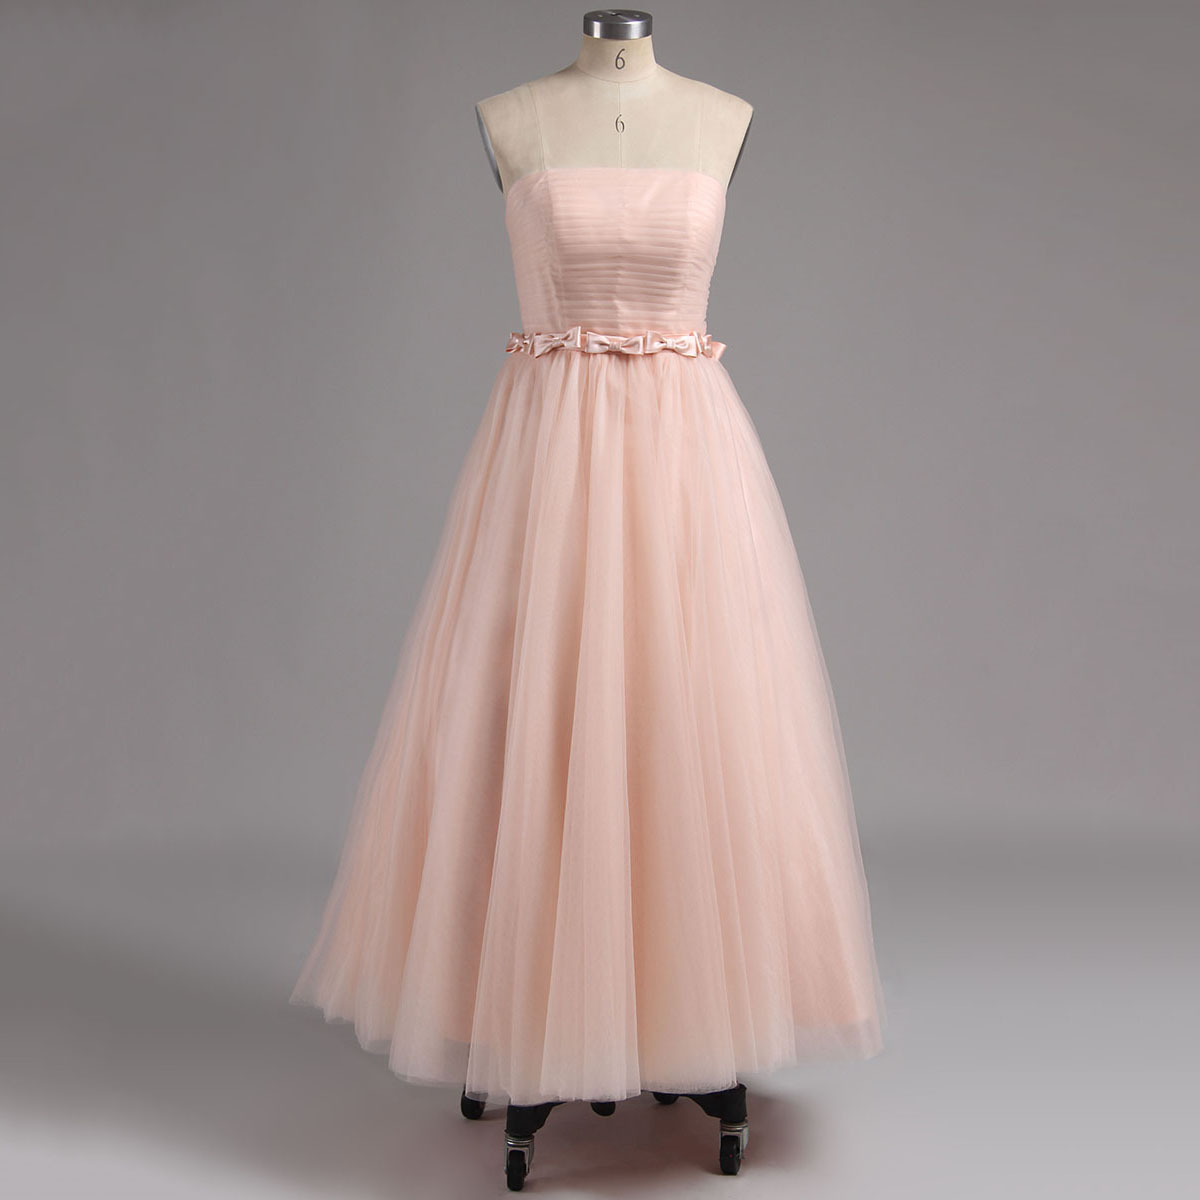 Strapless Homecoming Dress In Tea Length With Pleats, Princess Lace-up Homecoming Dress With Bowknot, Elegant Pink Tulle Homecoming Dress